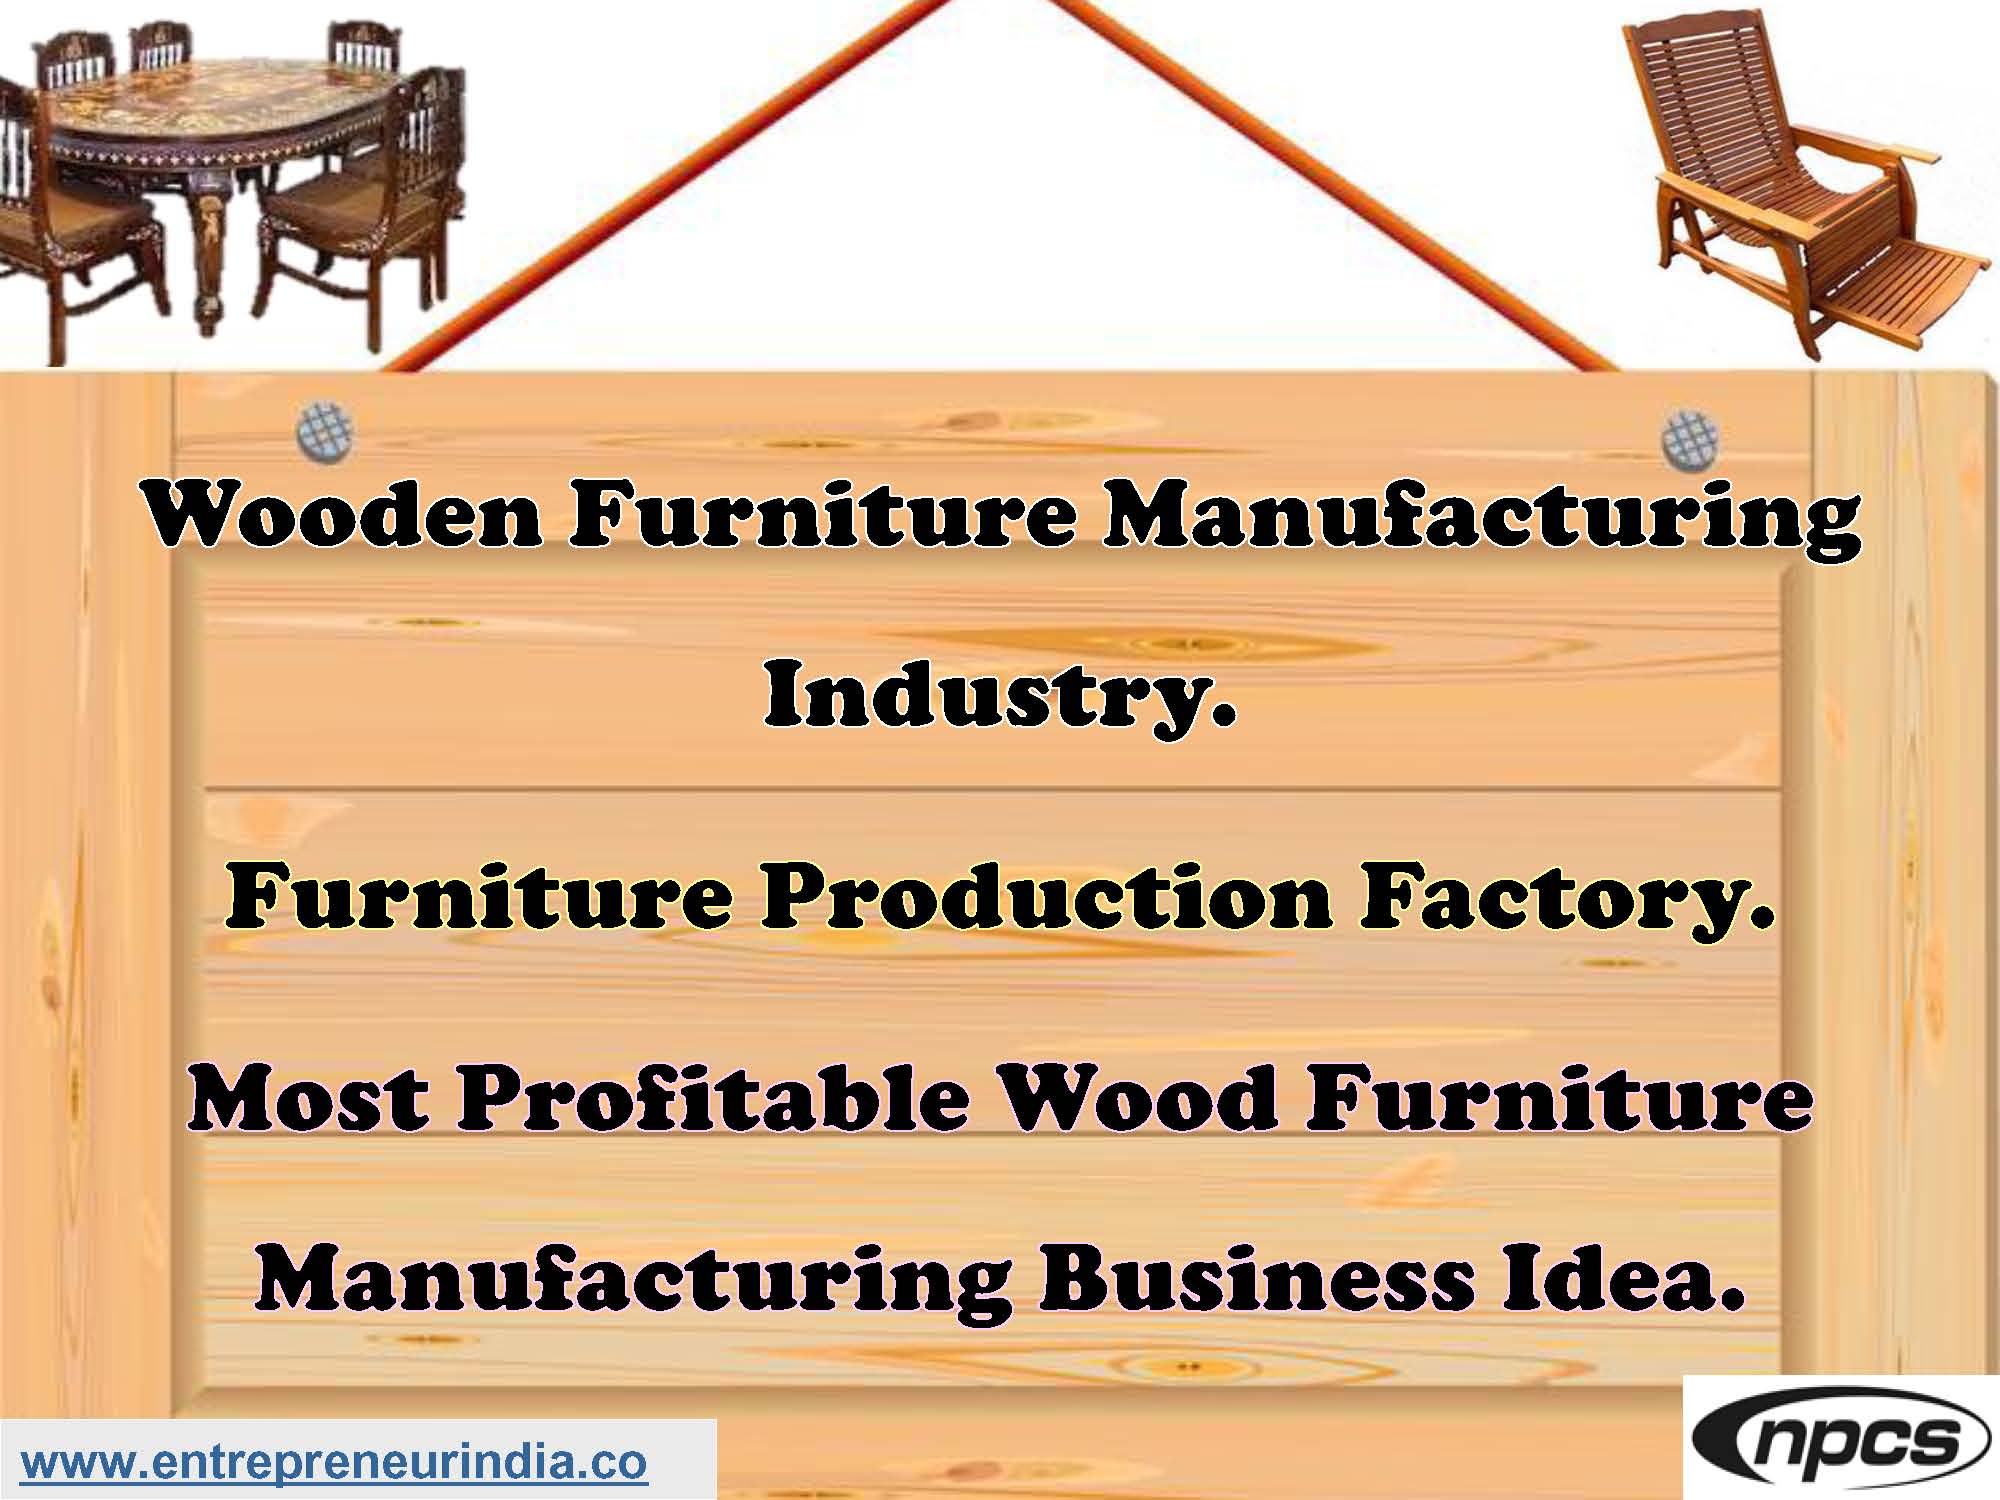 Wooden Furniture Manufacturing Industry